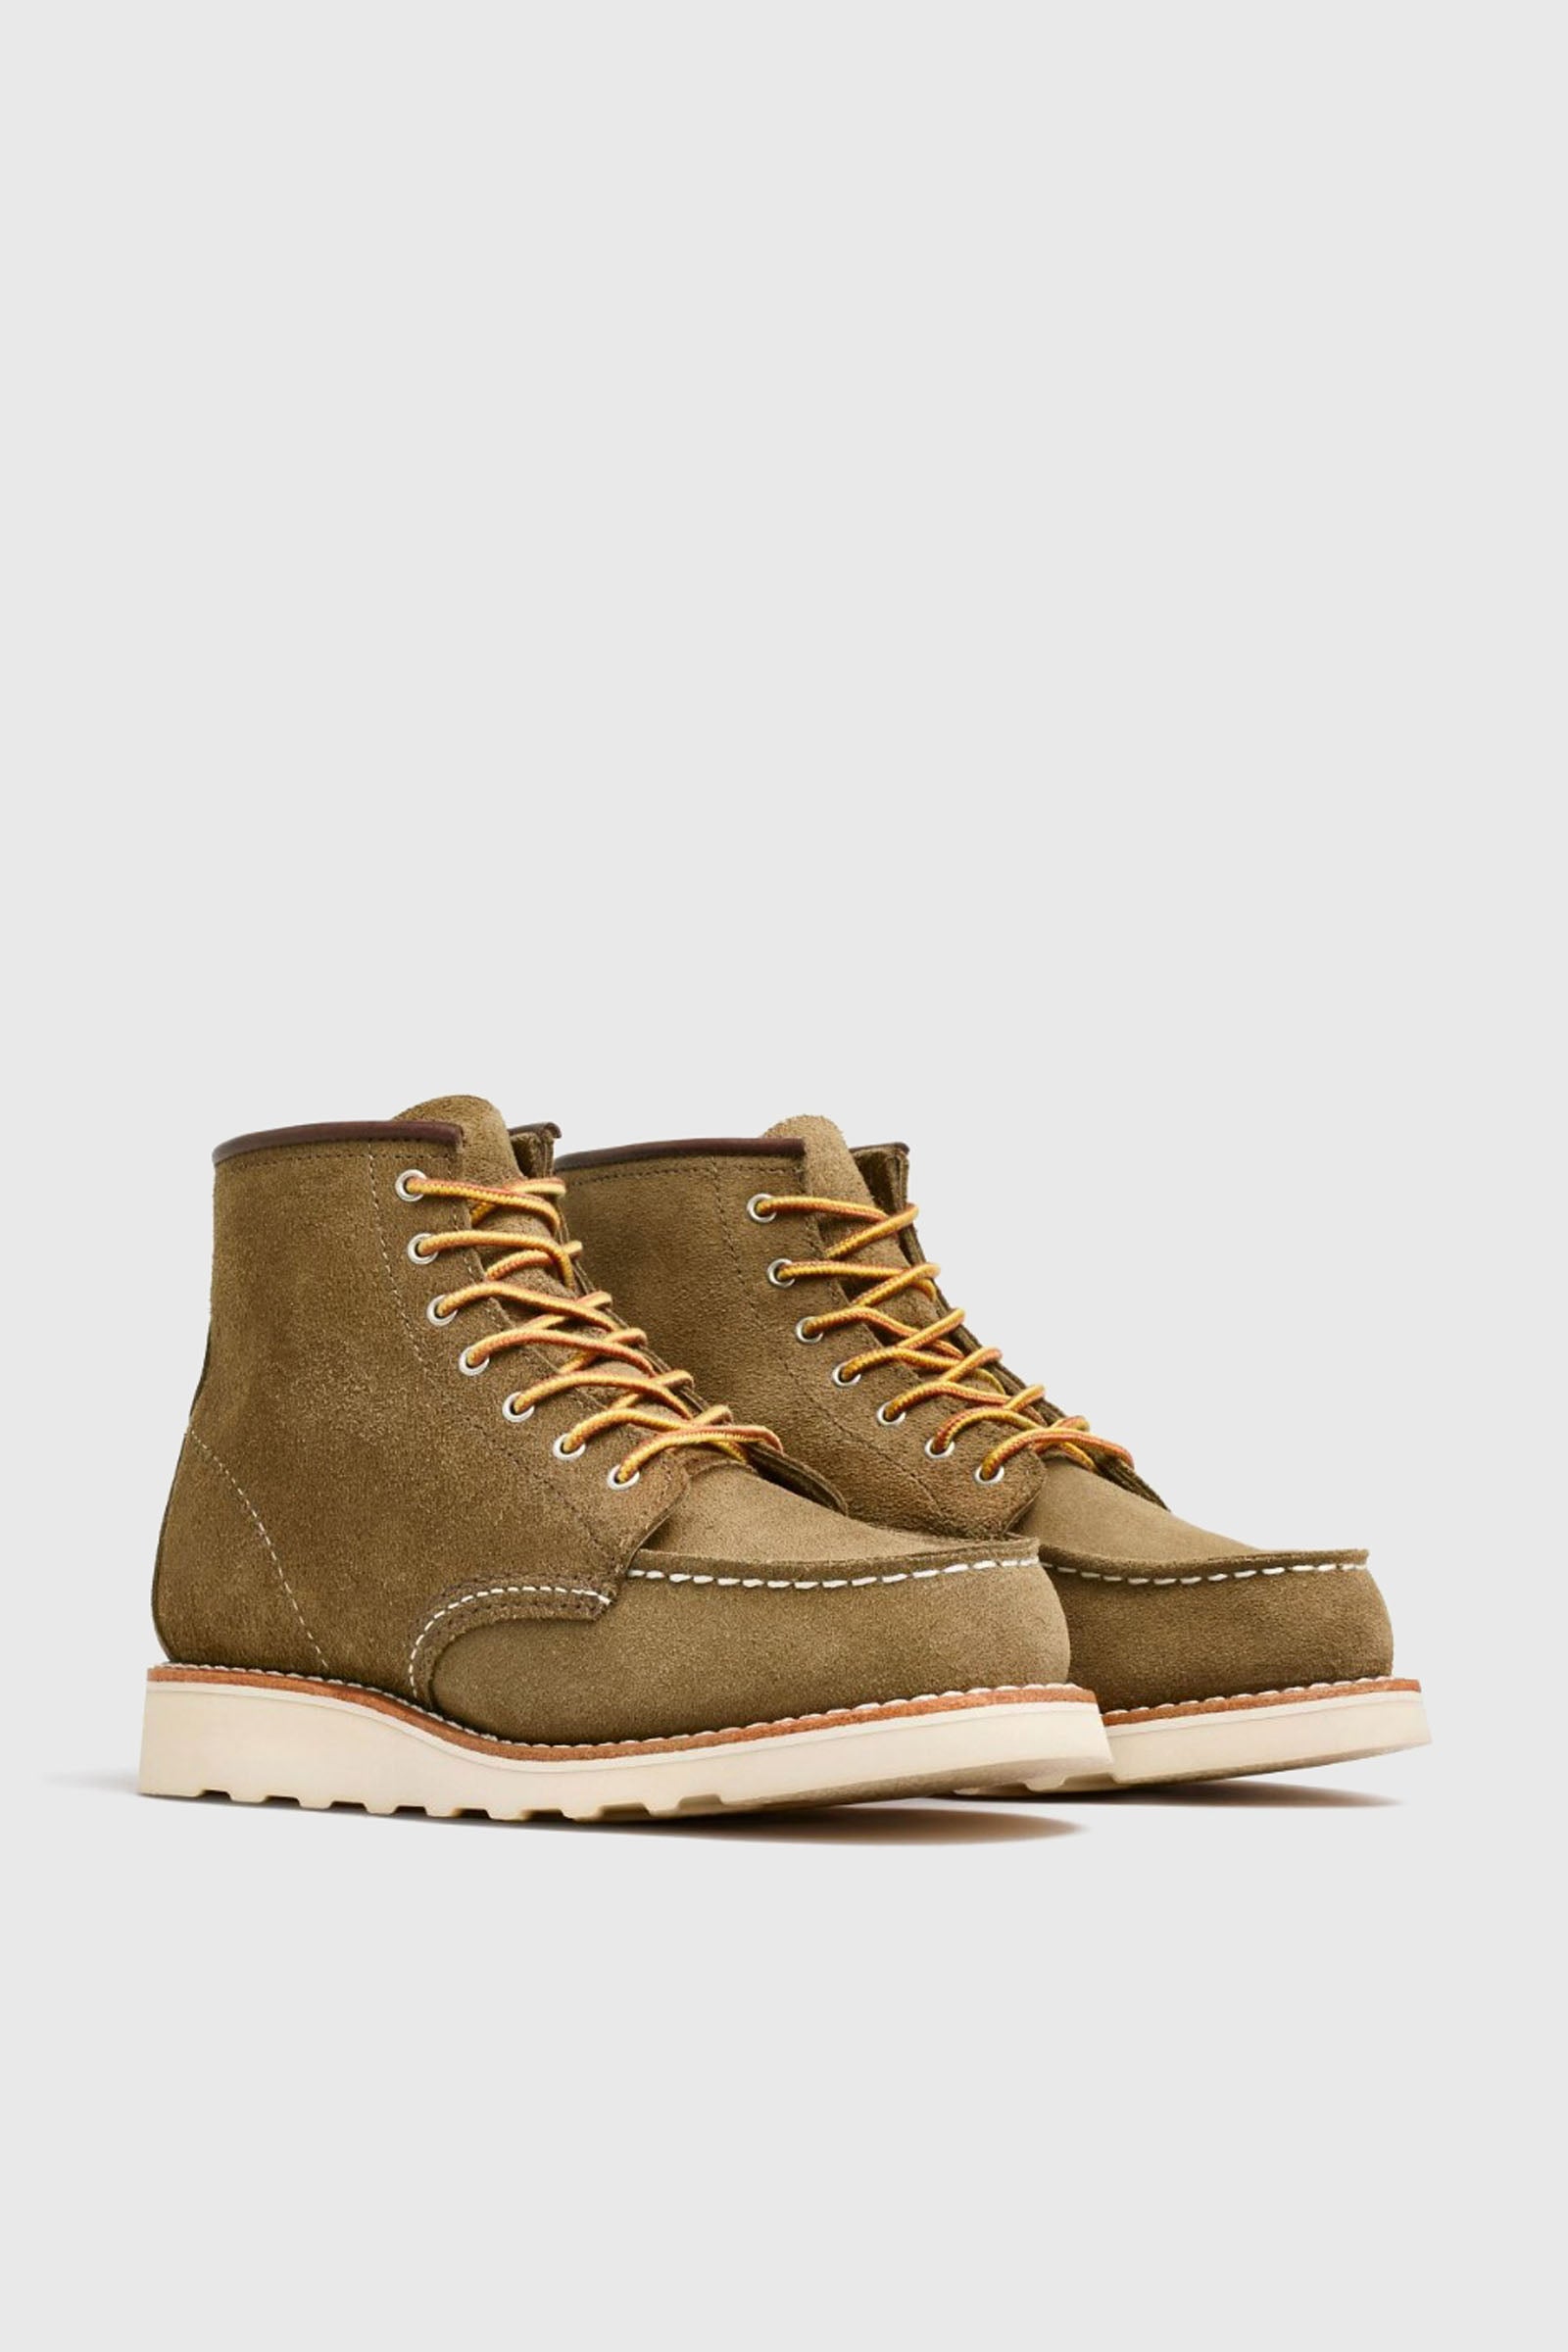 Red Wing Stivaletto 6-inch Classic Moc Toe In Pelle Mohave Verde Oliva Uomo - 2